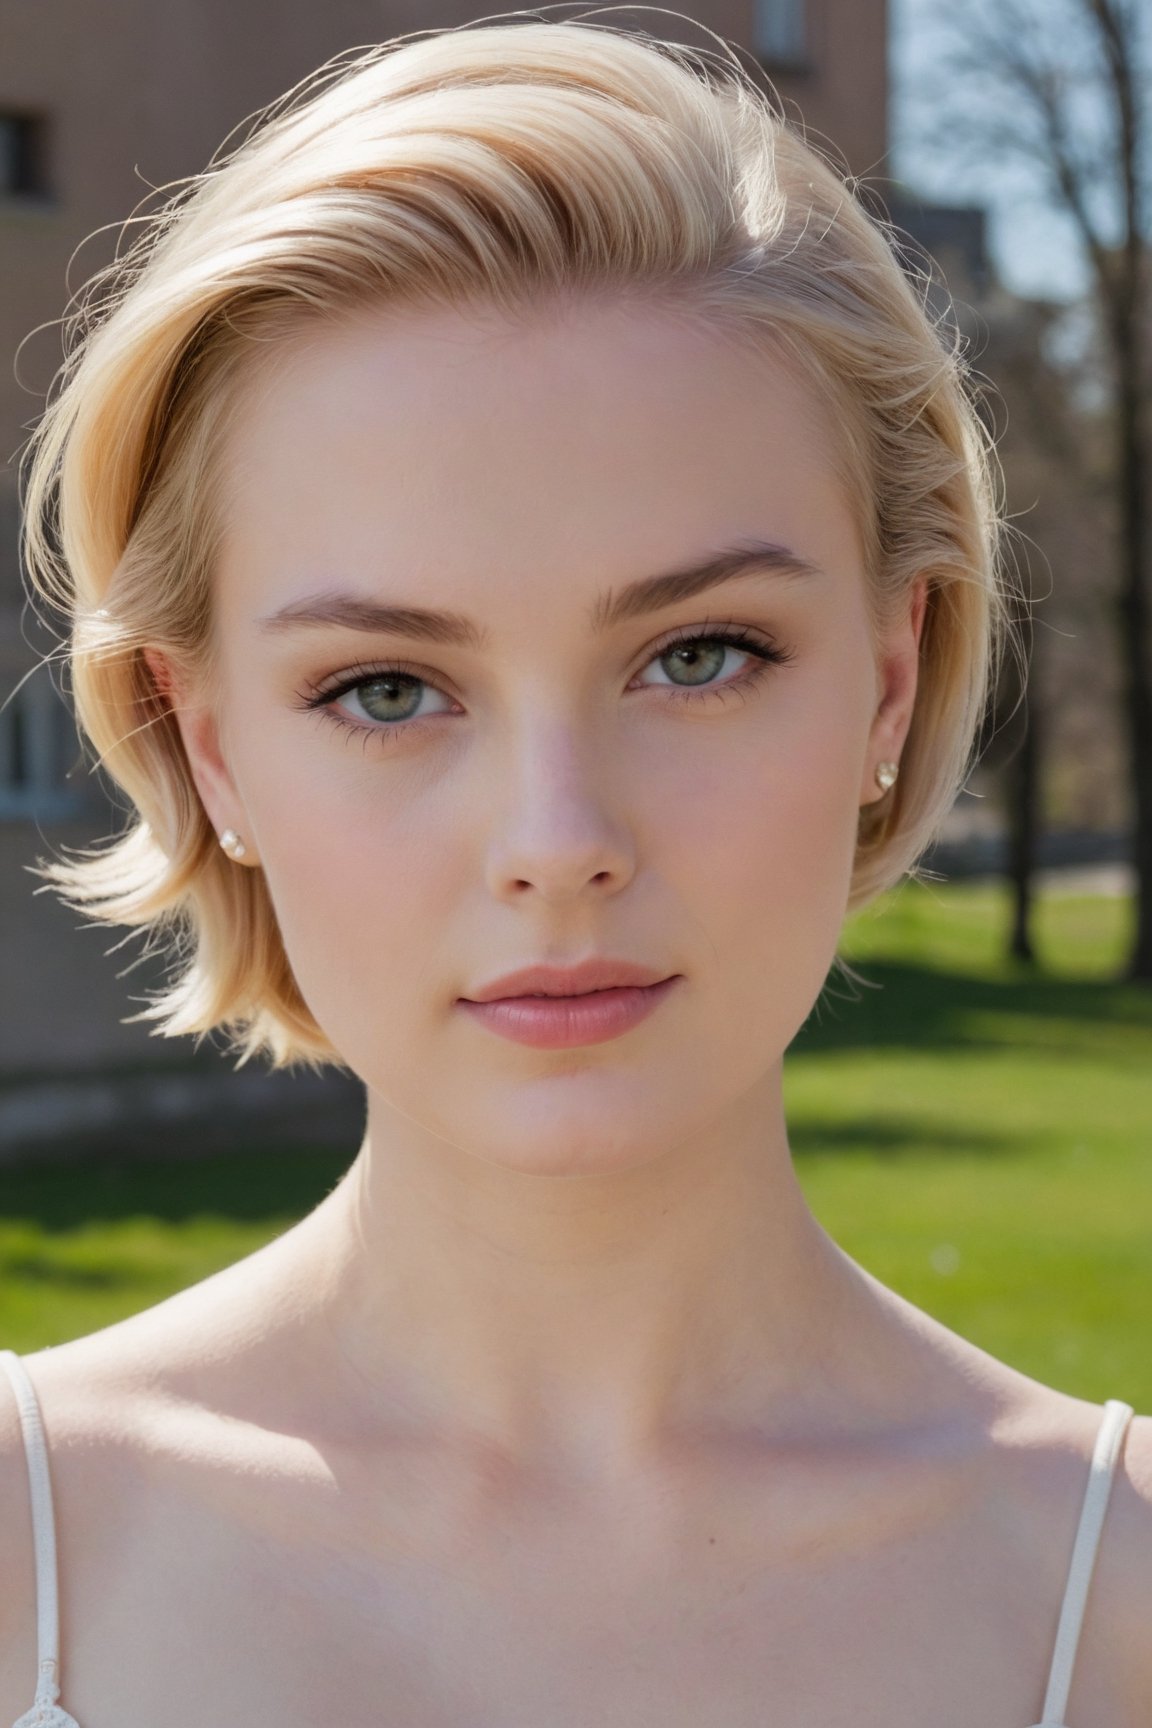 headshot,Nudity,Naked,Nude,No Clothes,Blonde hair,face similar to Grace Kelly,Russian,pale skin,Undercut Hairstyle,Natural makeup,21 year old,Boyish_normal_breasts,headshot,Sunny Day Spring,Posing for a photo



